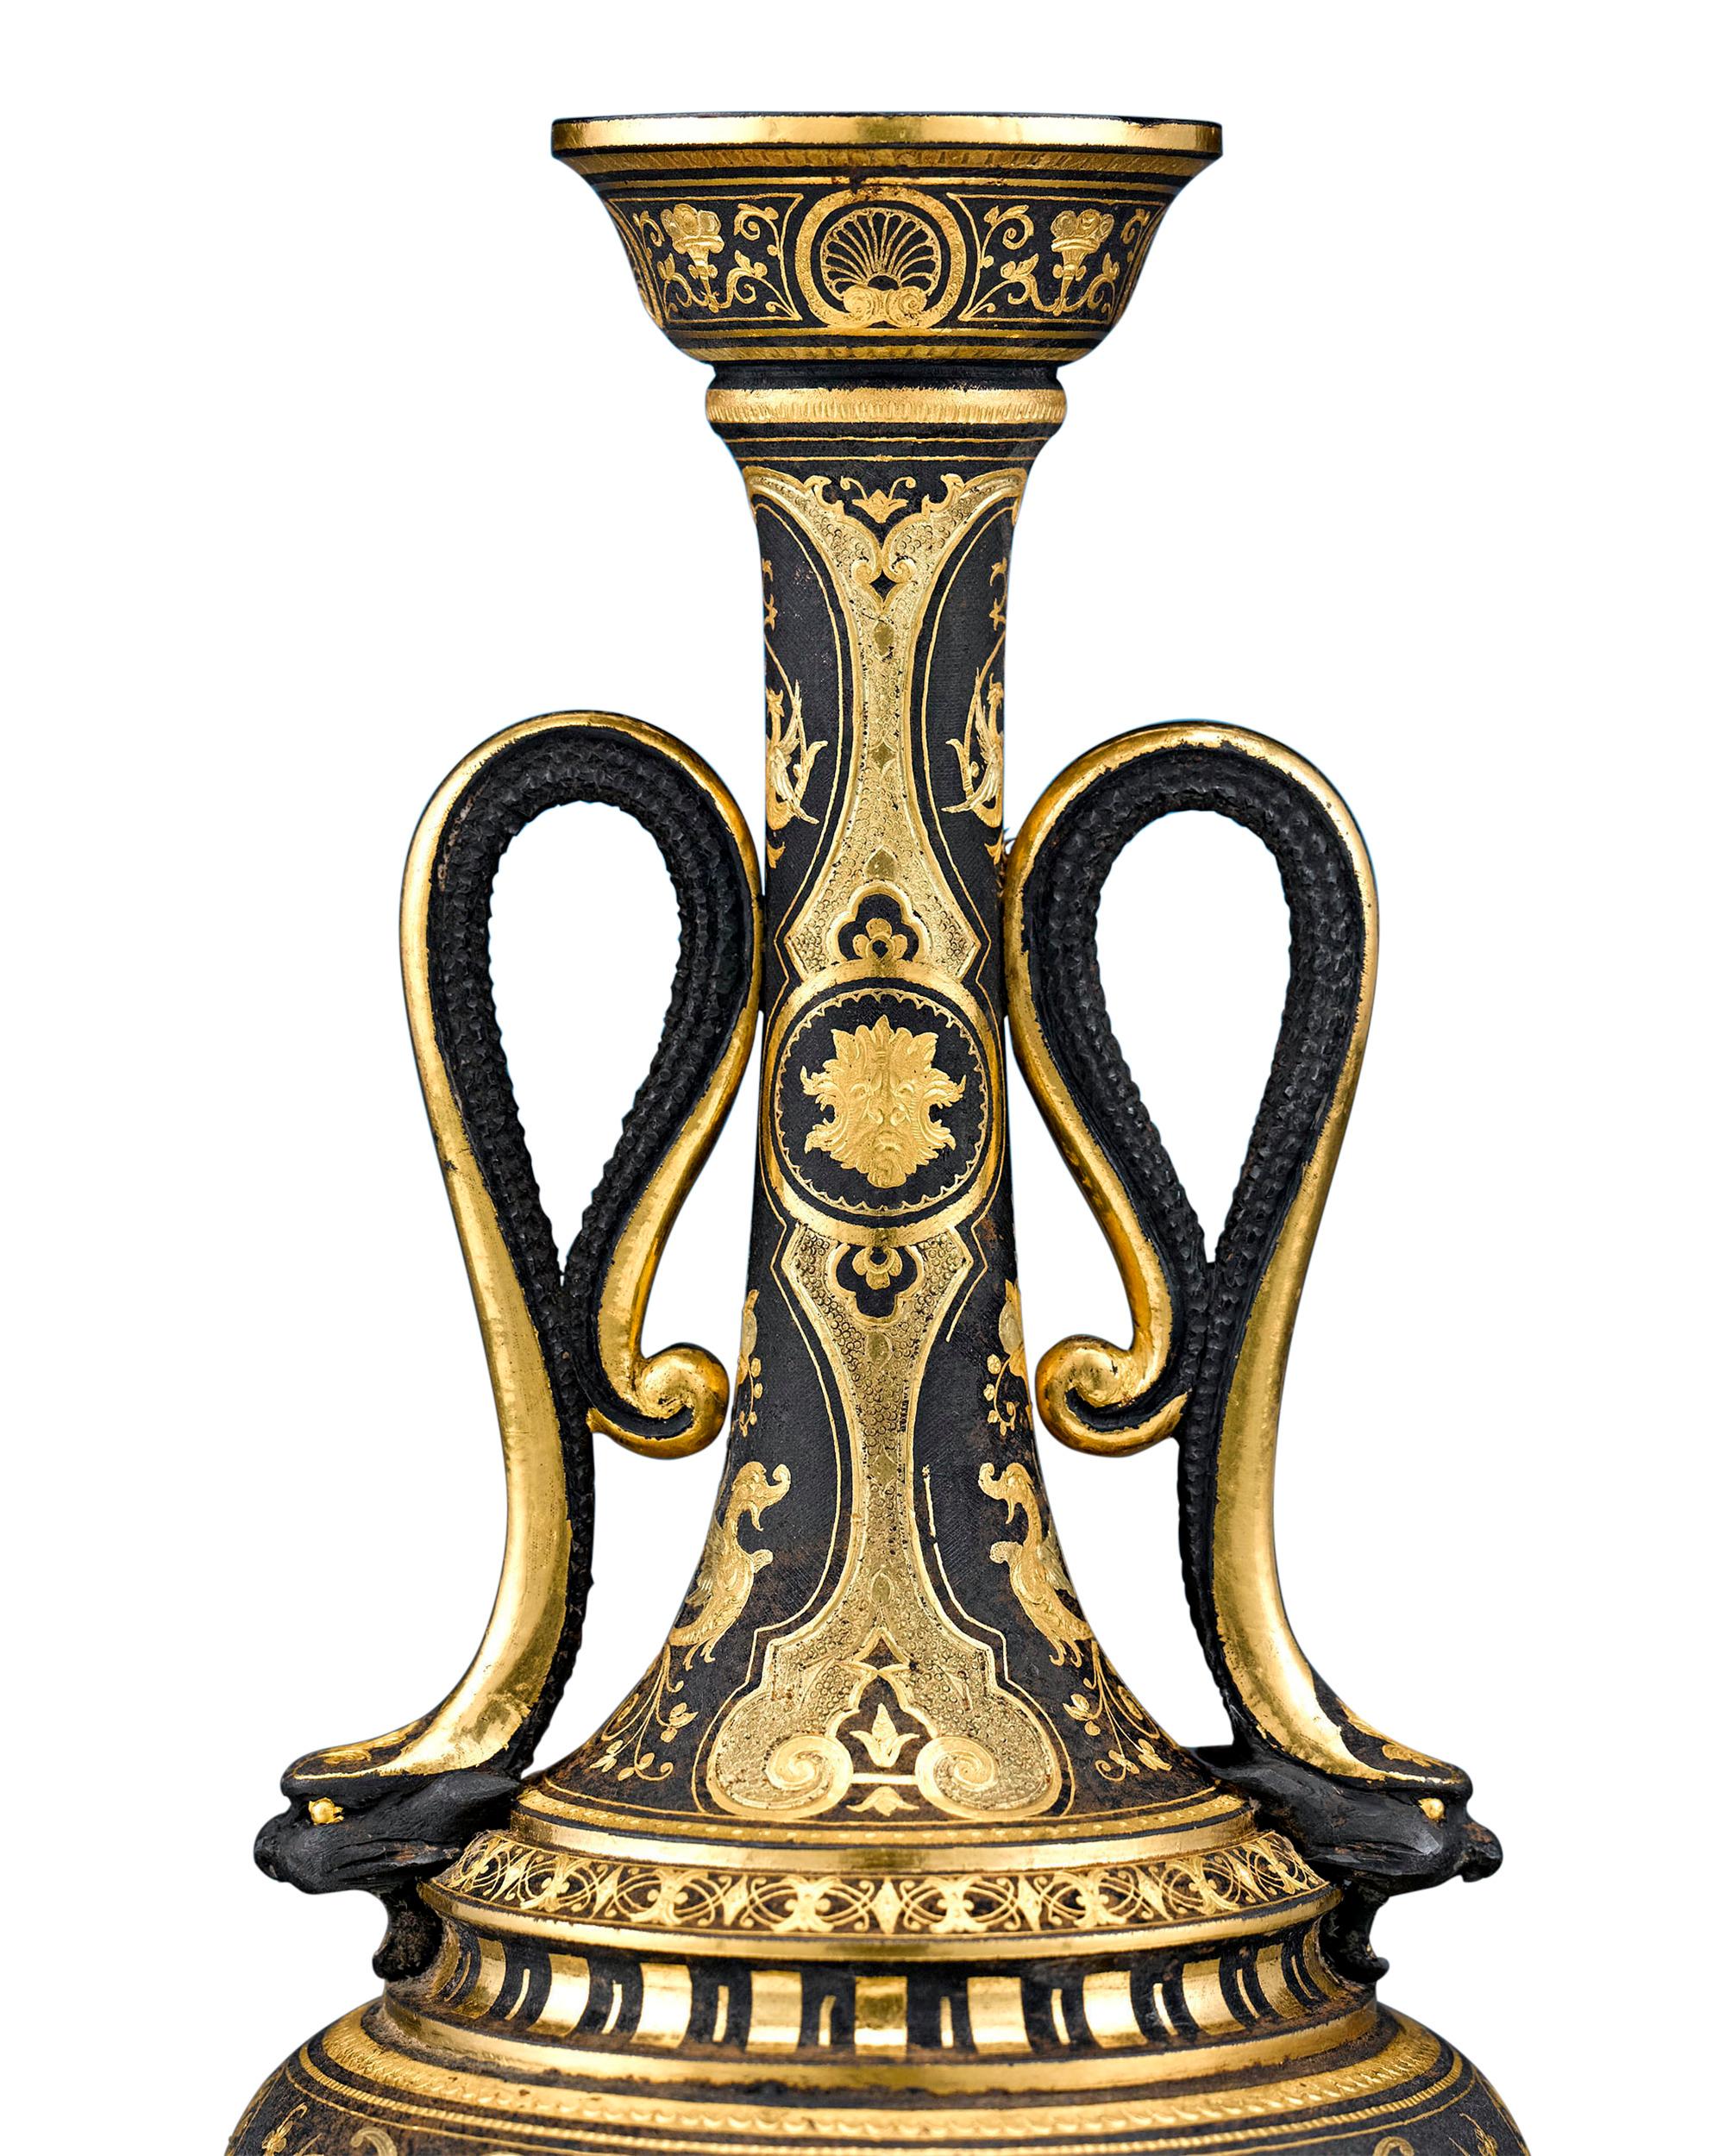 This superb damascene vase is exemplary of Toledo metalwork. The incredibly fine oxidized steel with gold inlay is congruent with the organic motifs used by craftsmen in the Zamboanga Peninsula of the Philippines. The Spanish first arrived in